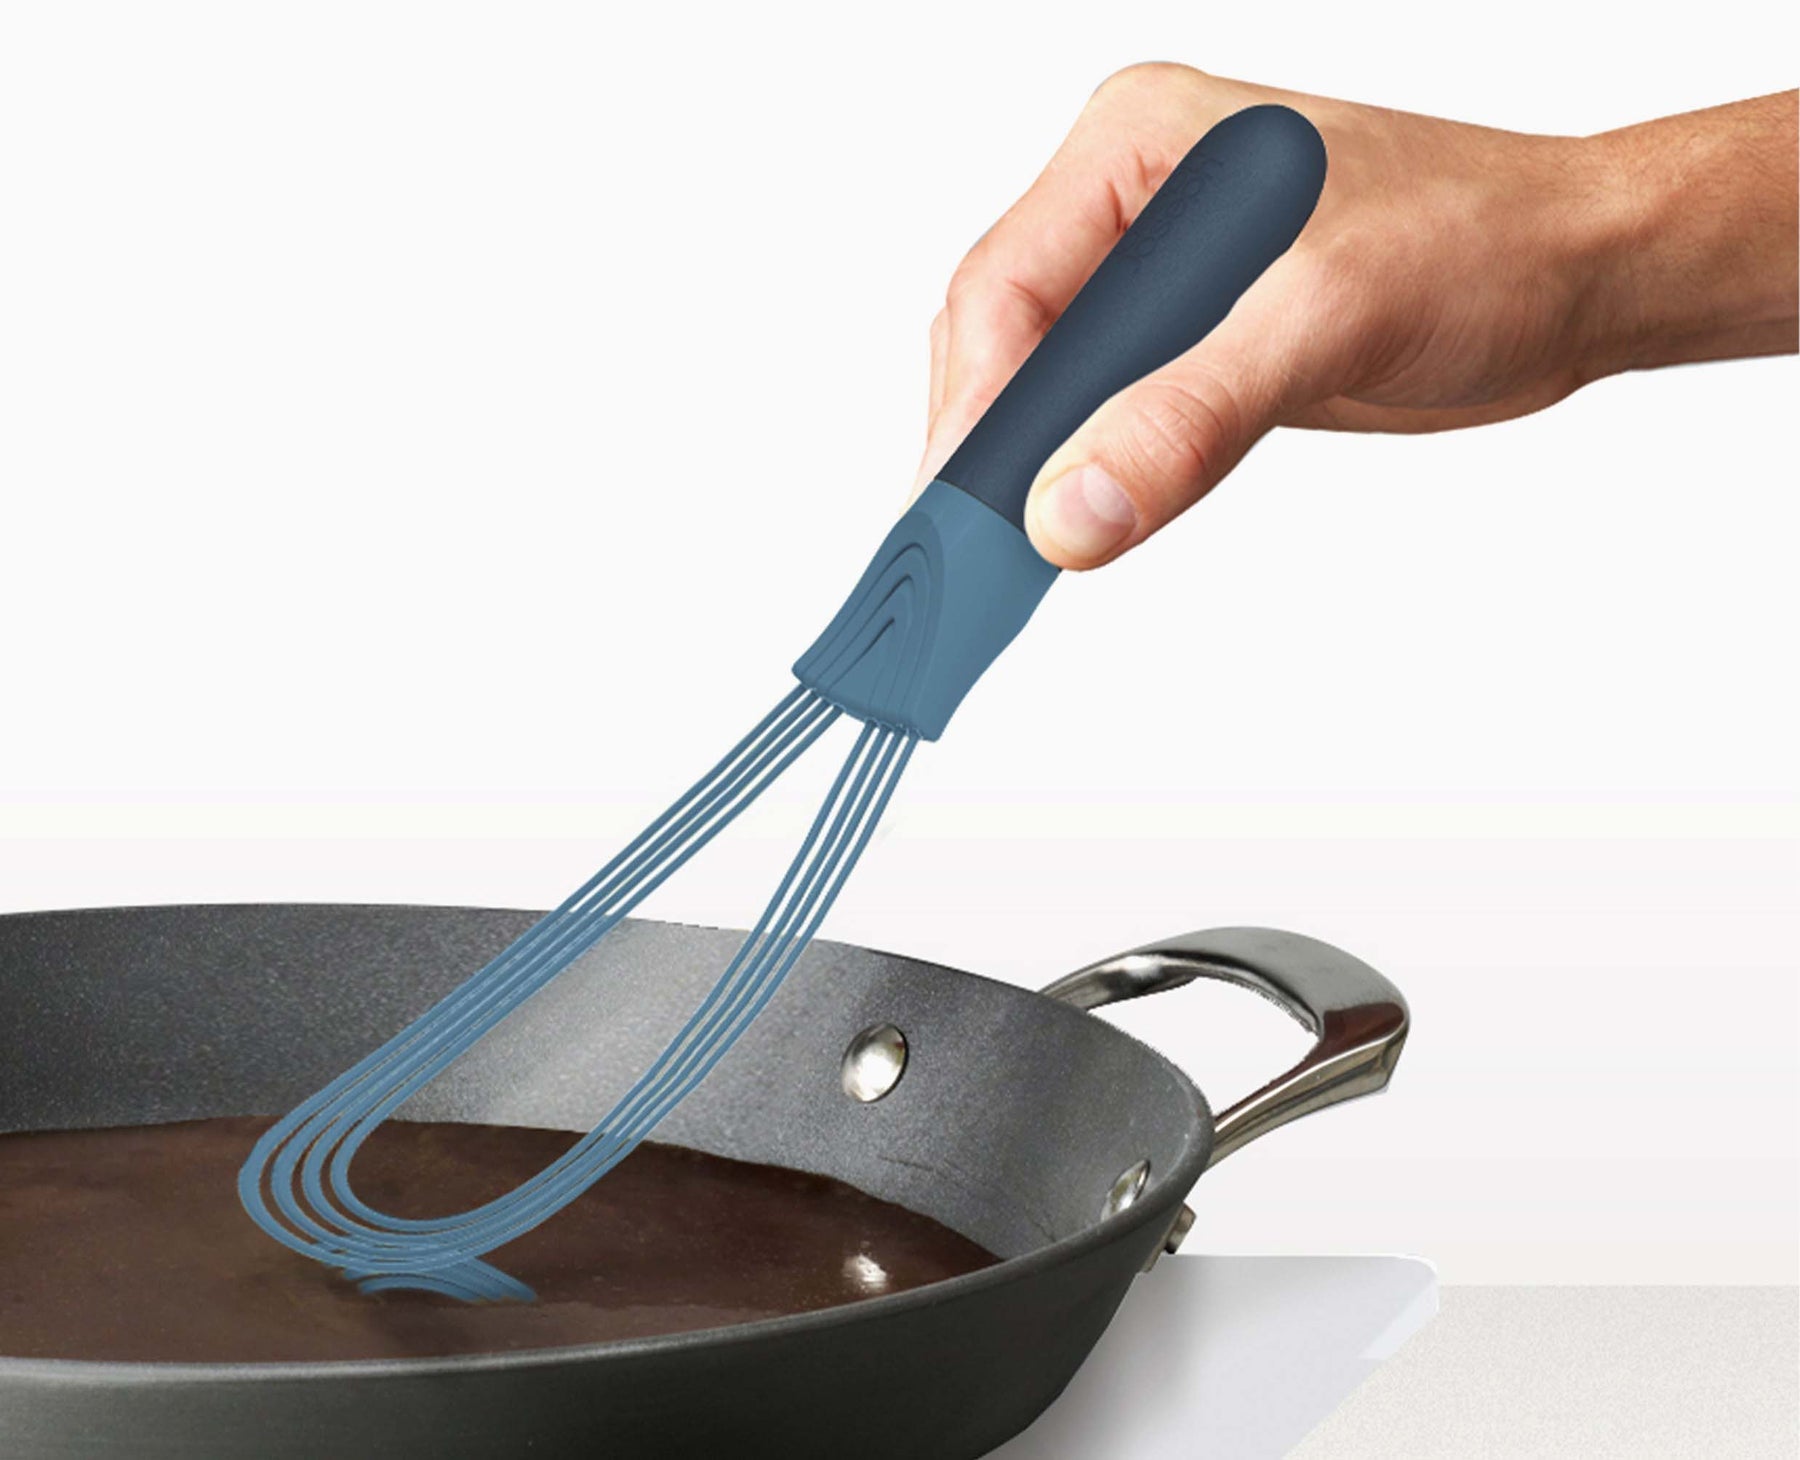 Black and Friday Deals Kitchen Premium Silicone Whisk With Heat Non-Stick  Silicone Whisk Cook